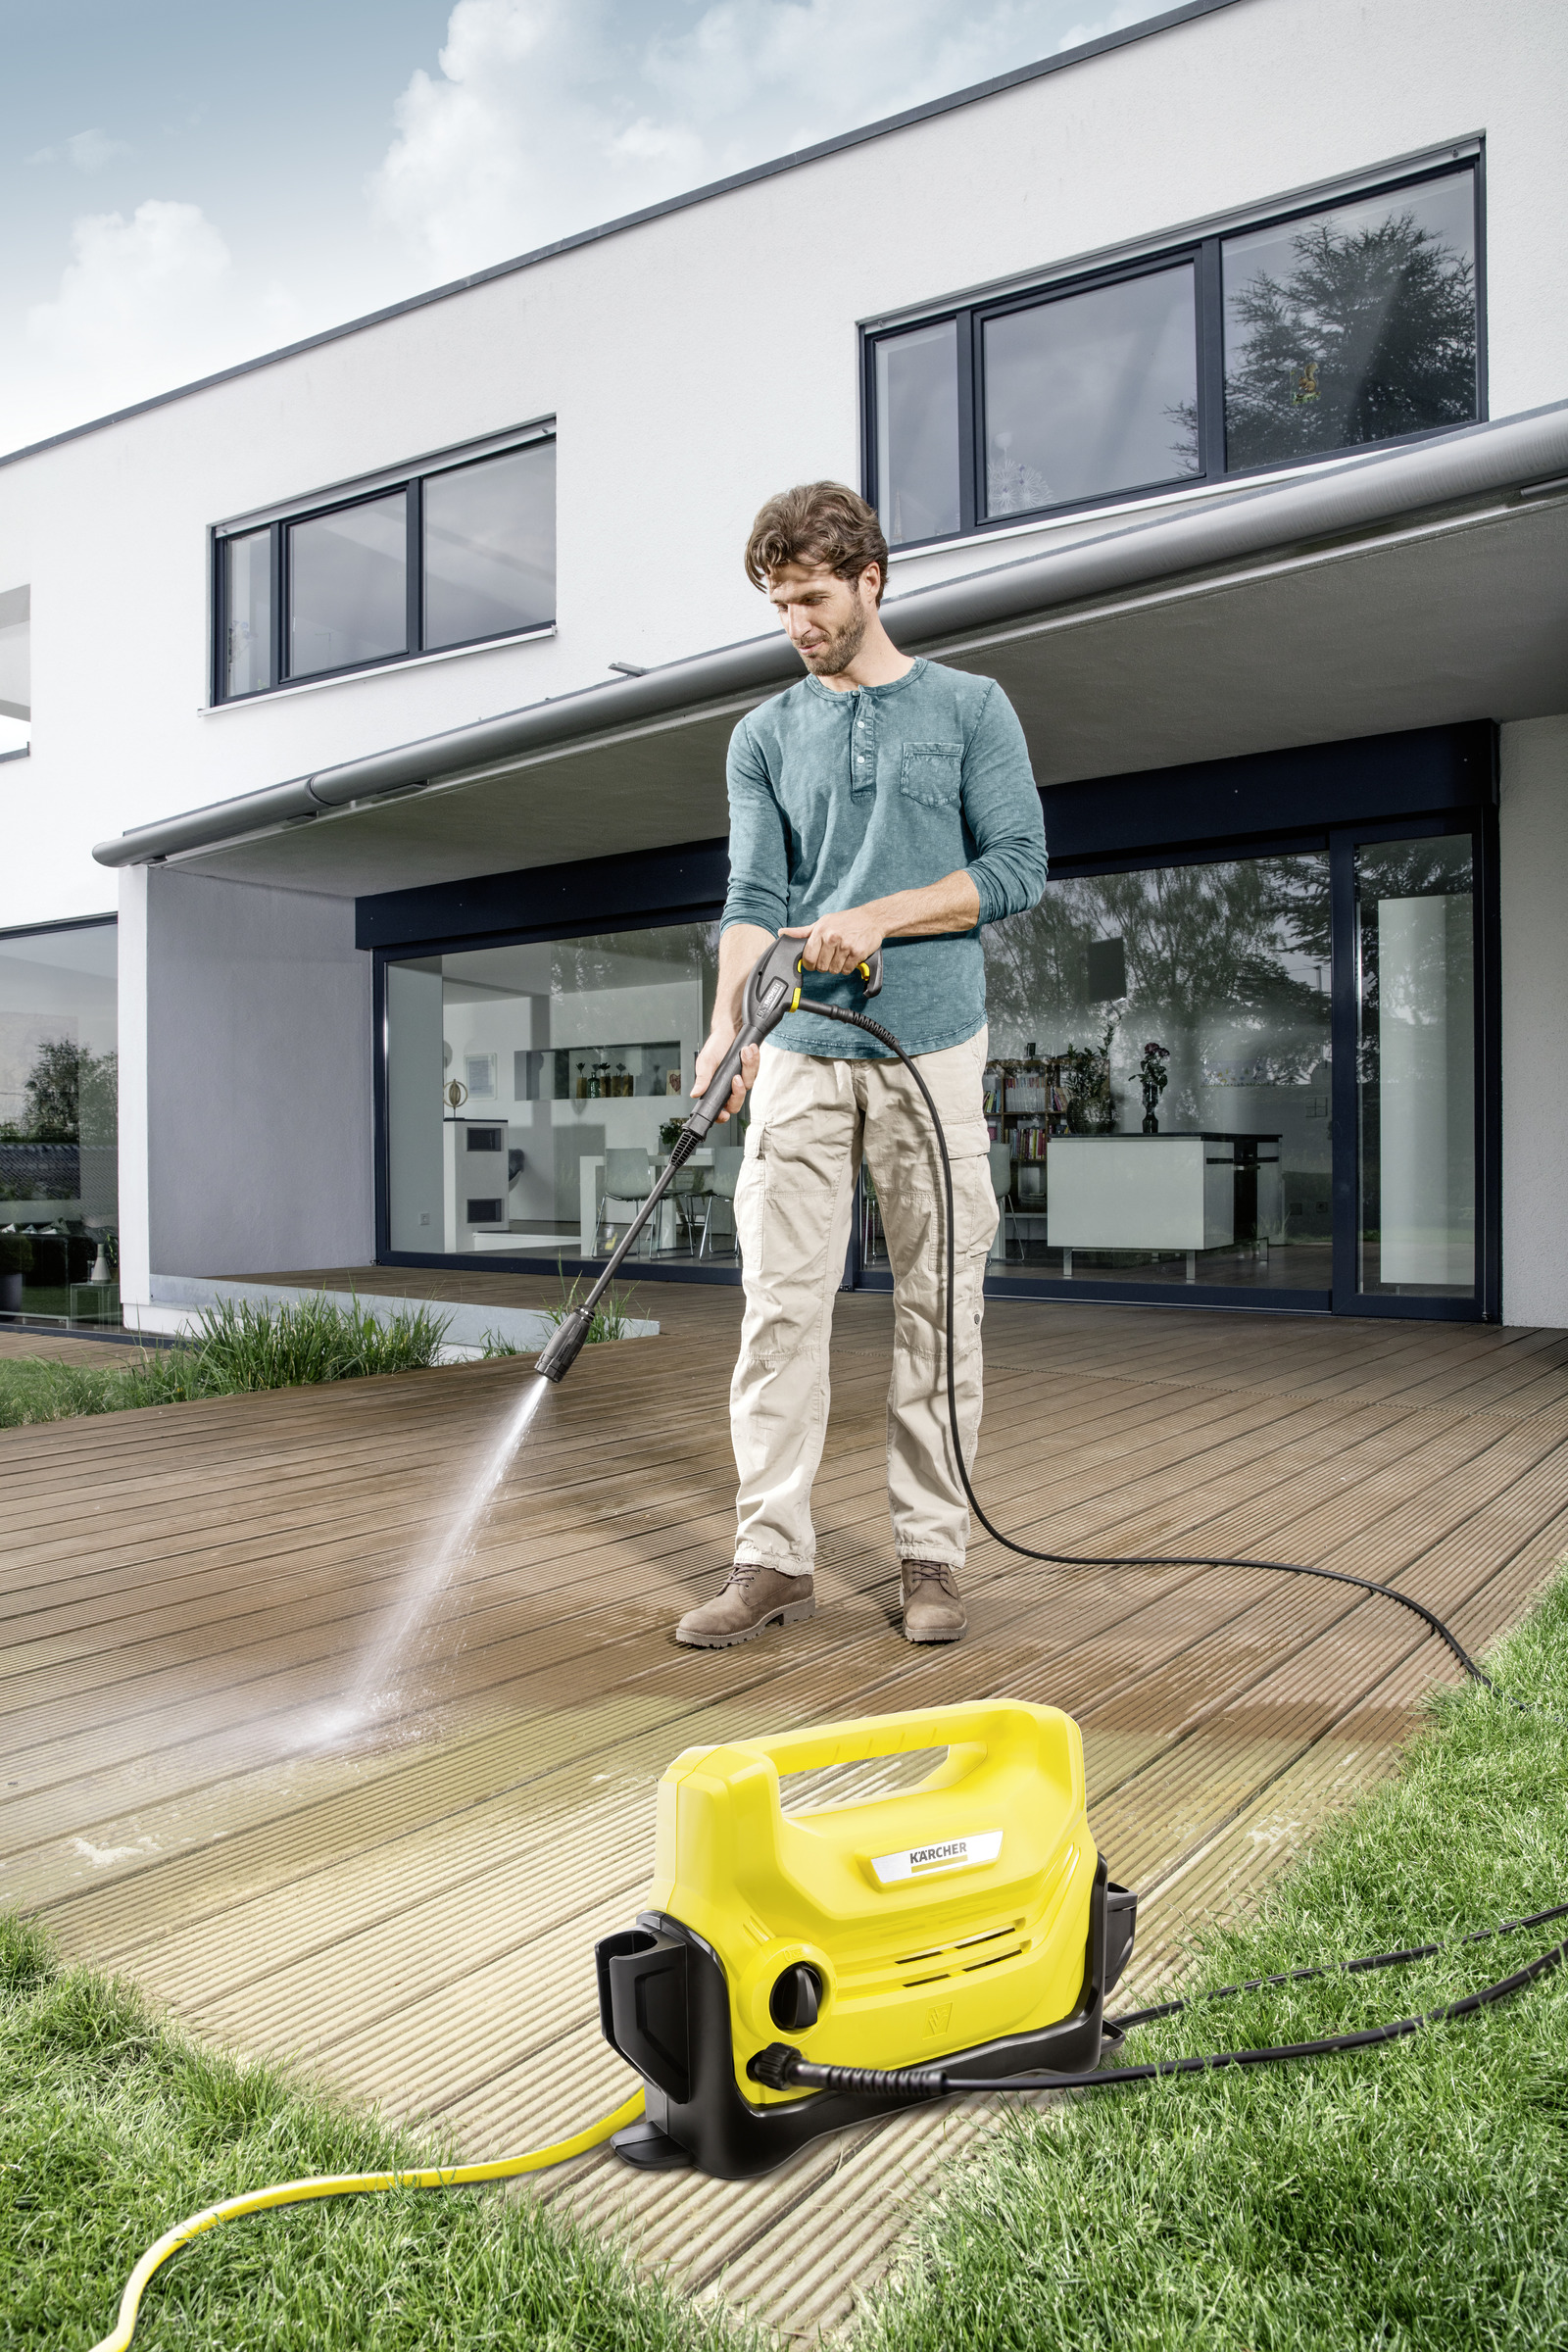 Karcher Follow Me 1500 PSI (Electric-Cold Water) Pressure Washer